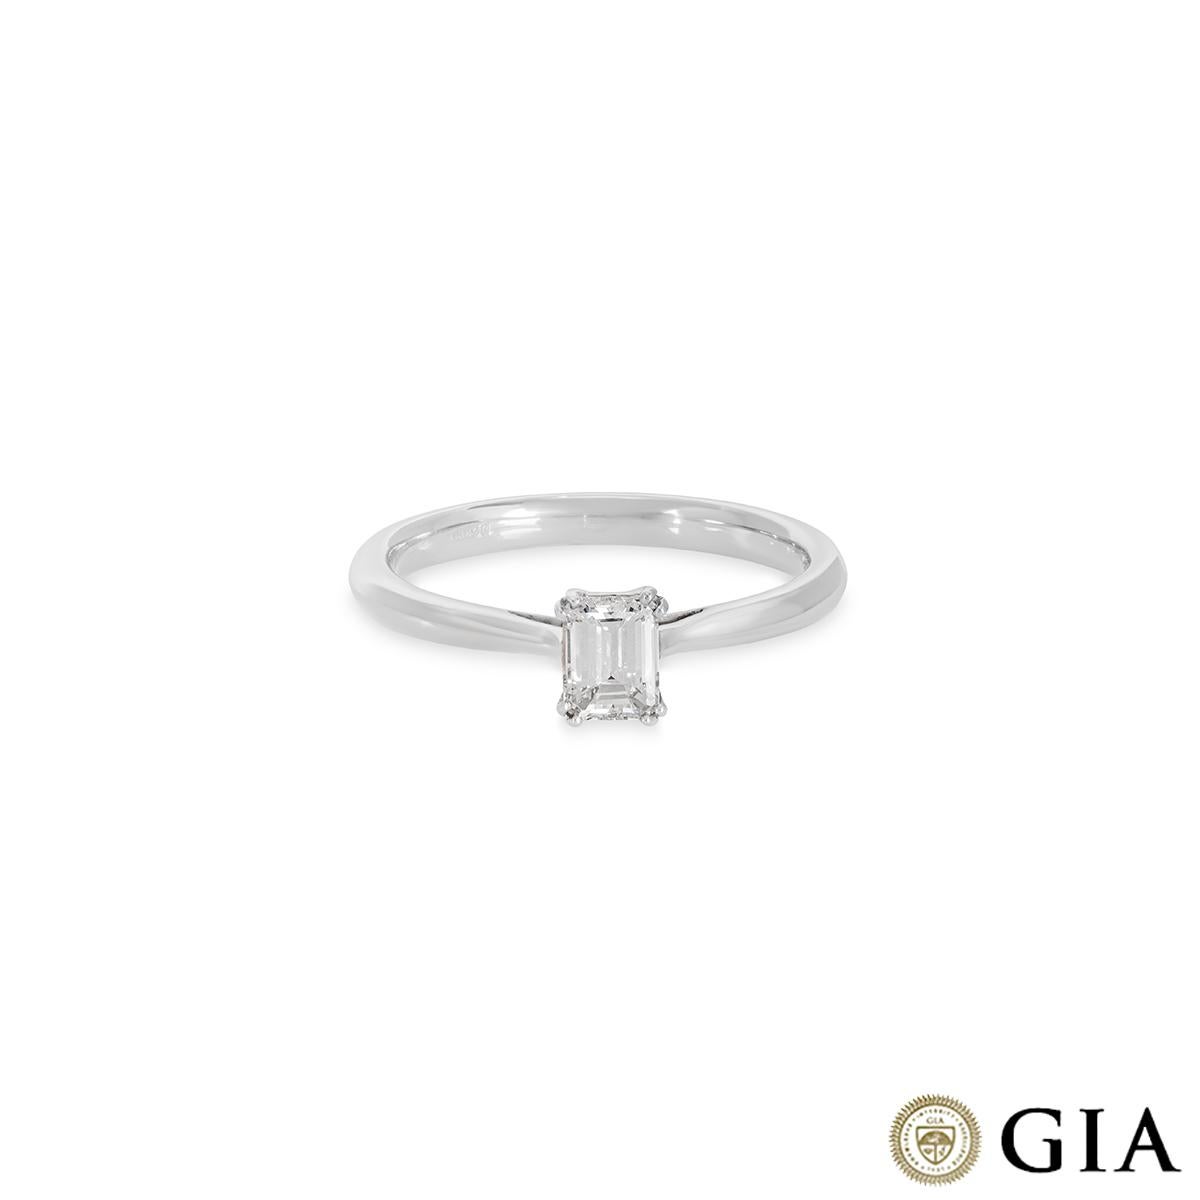 GIA Certified White Gold Emerald Cut Diamond Ring 0.43ct E/VS2 In New Condition For Sale In London, GB